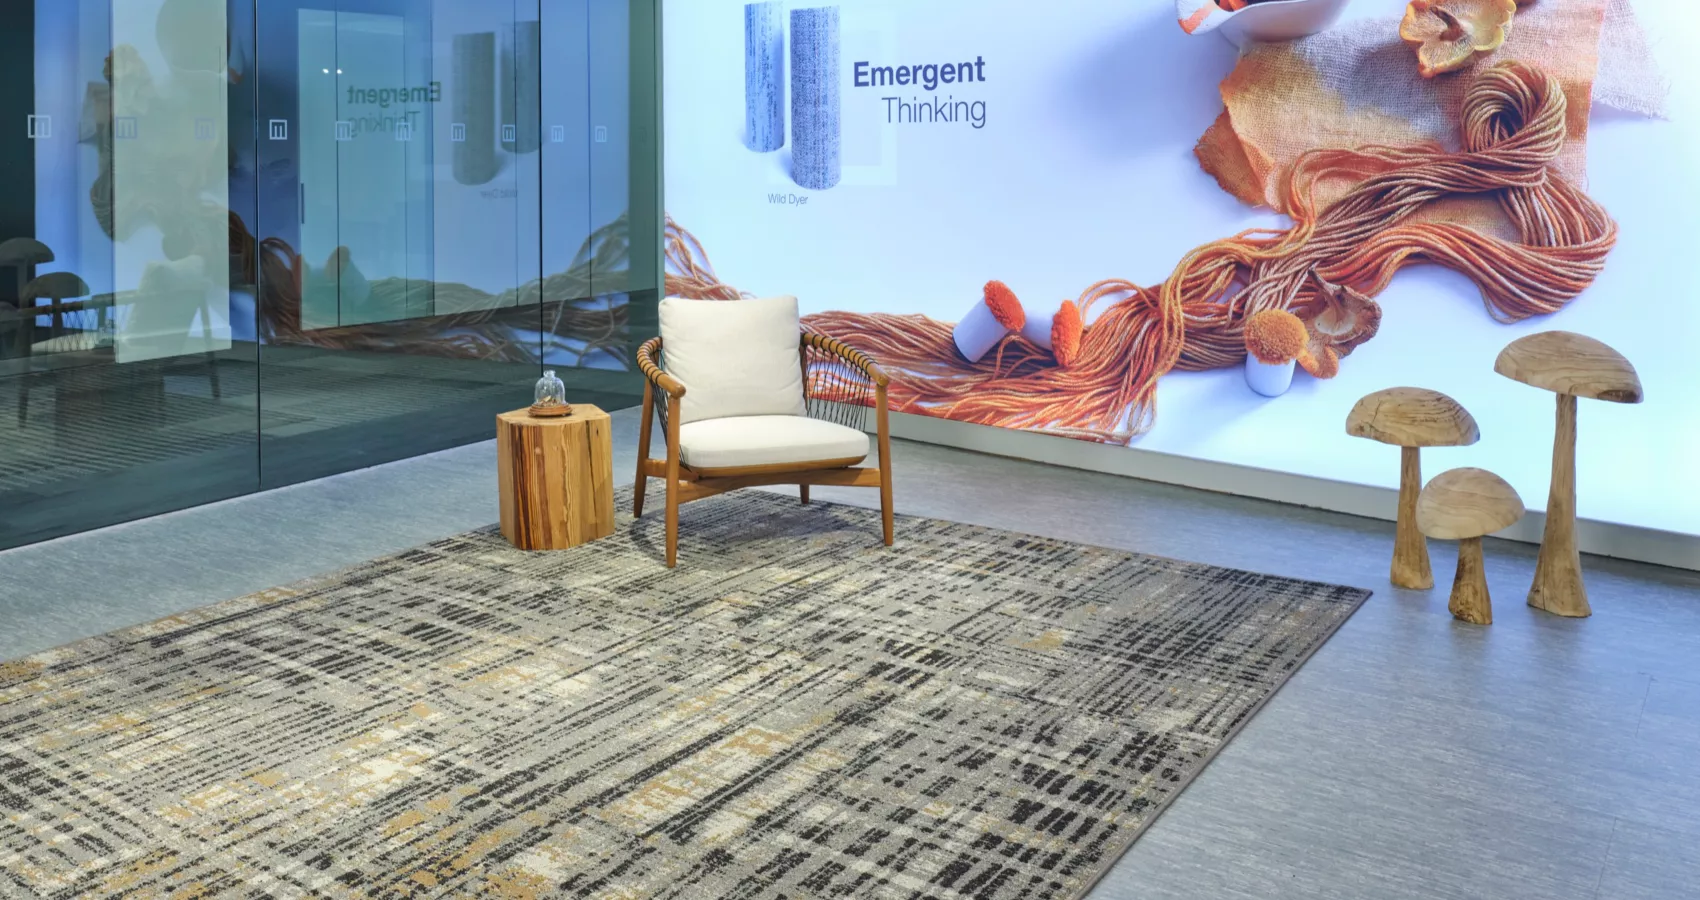 Discover Emergent Thinking through our Chicago showroom experience. Featuring a virtual tour, award-winning products, and our latest collaborations with ArtLifting.